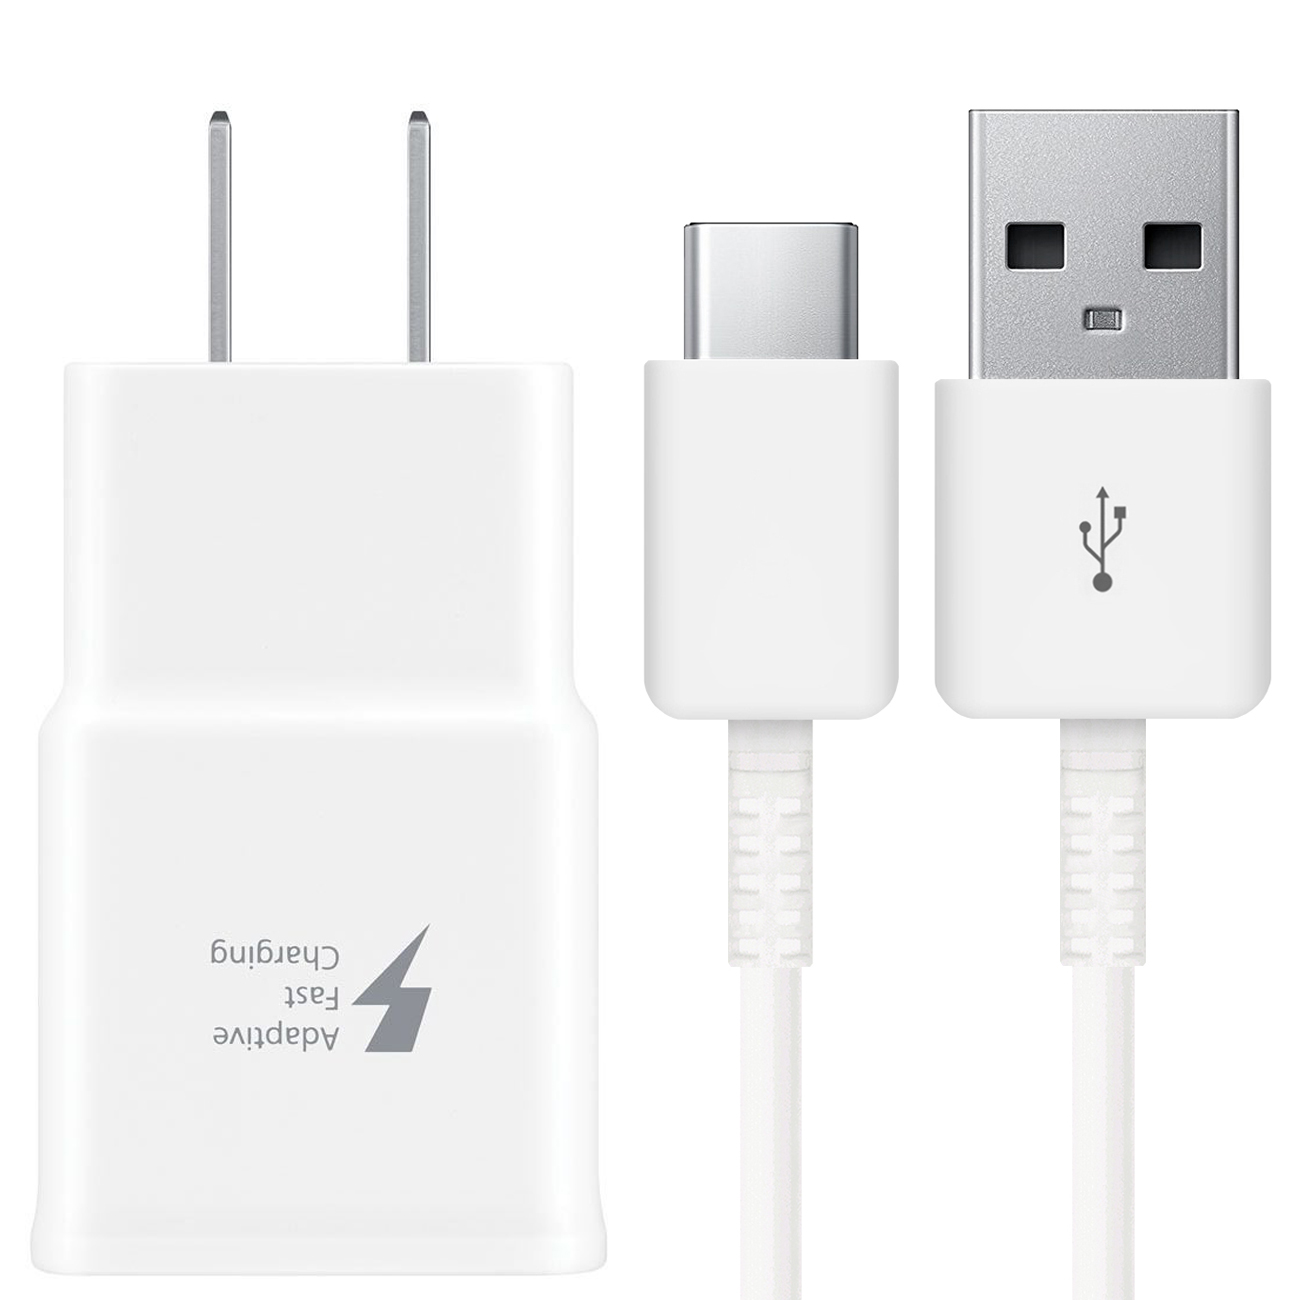 Samsung OEM Adaptive Fast Wall Charger kit with USB Type-C Cable Compatible with Samsung Galaxy S10/ S10 Plus/Note 8/ Note 9/ Note 10 Lg G6 G7 G8 ThinQ V30 V40 V50 (White) - image 1 of 3